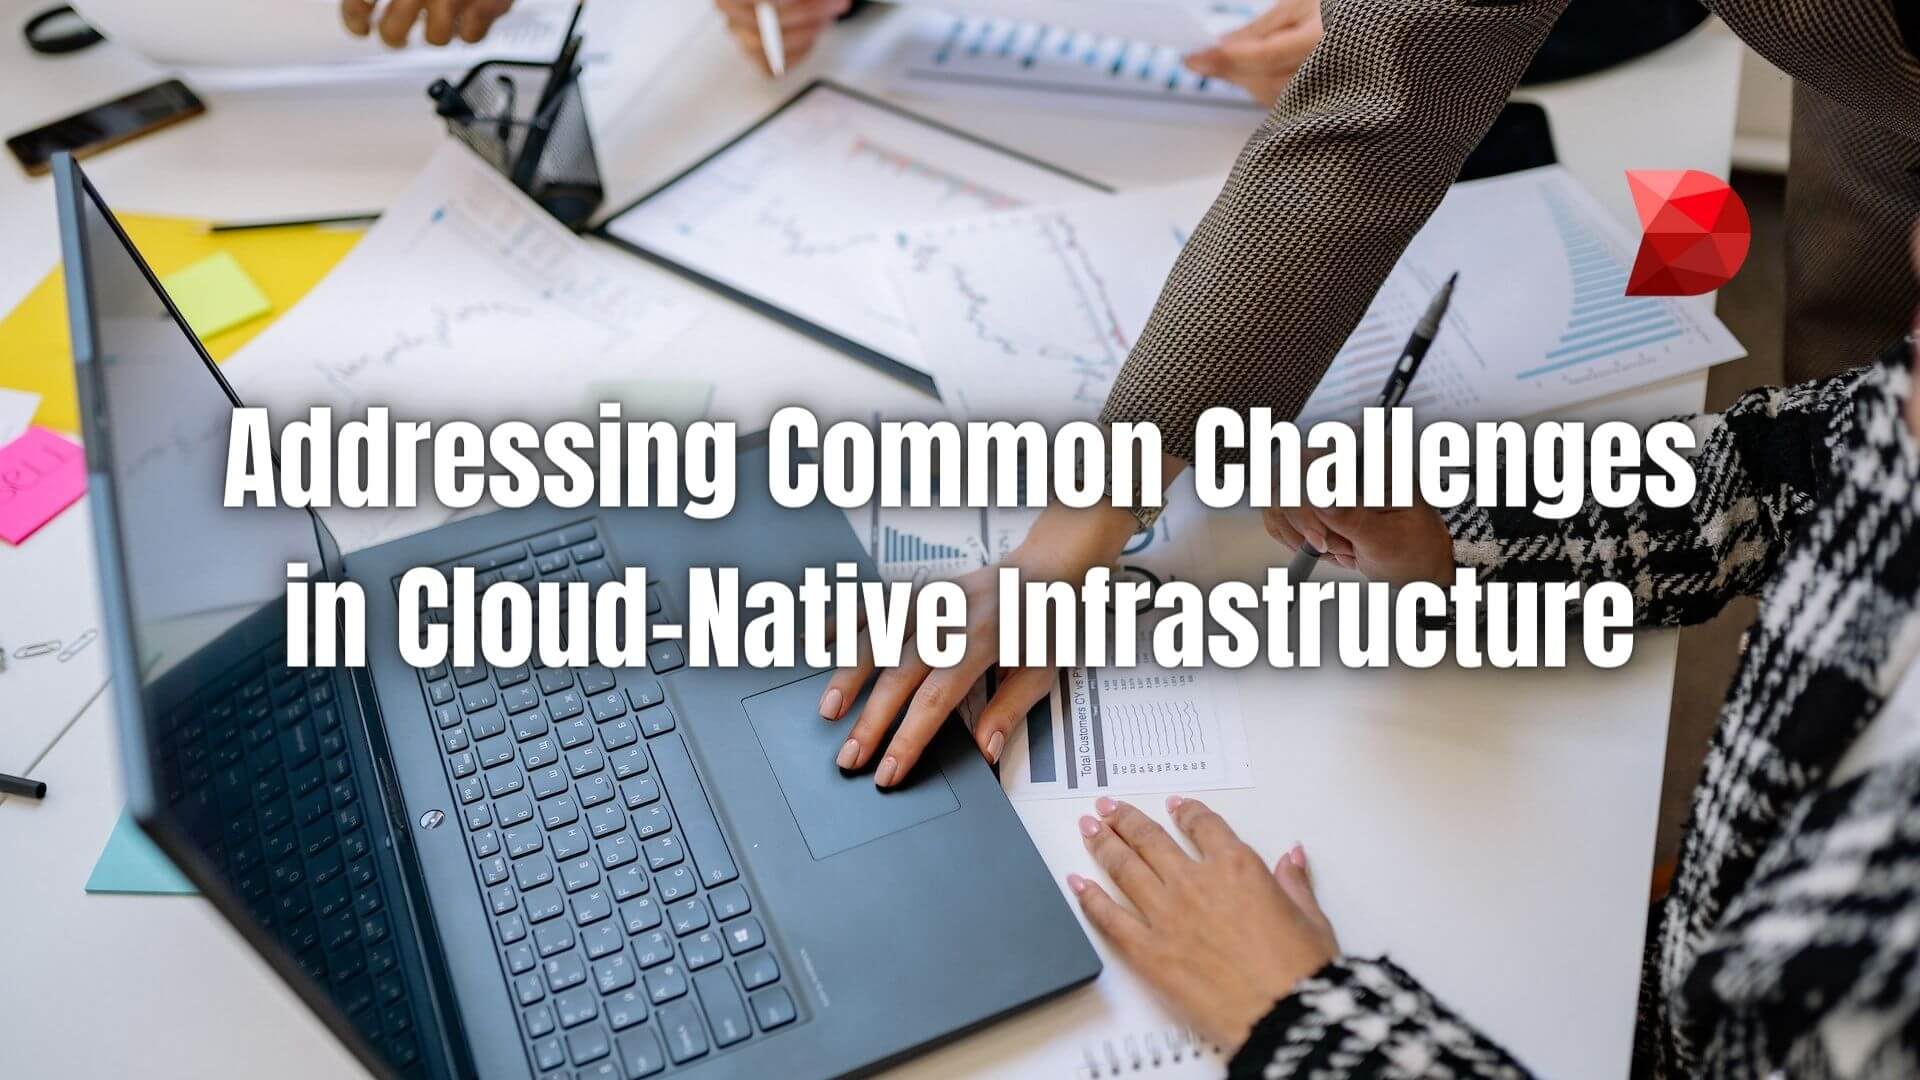 Cloud-native infrastructure is the creation, design, and governance of IT systems specifically designed for cloud environments. Learn more!